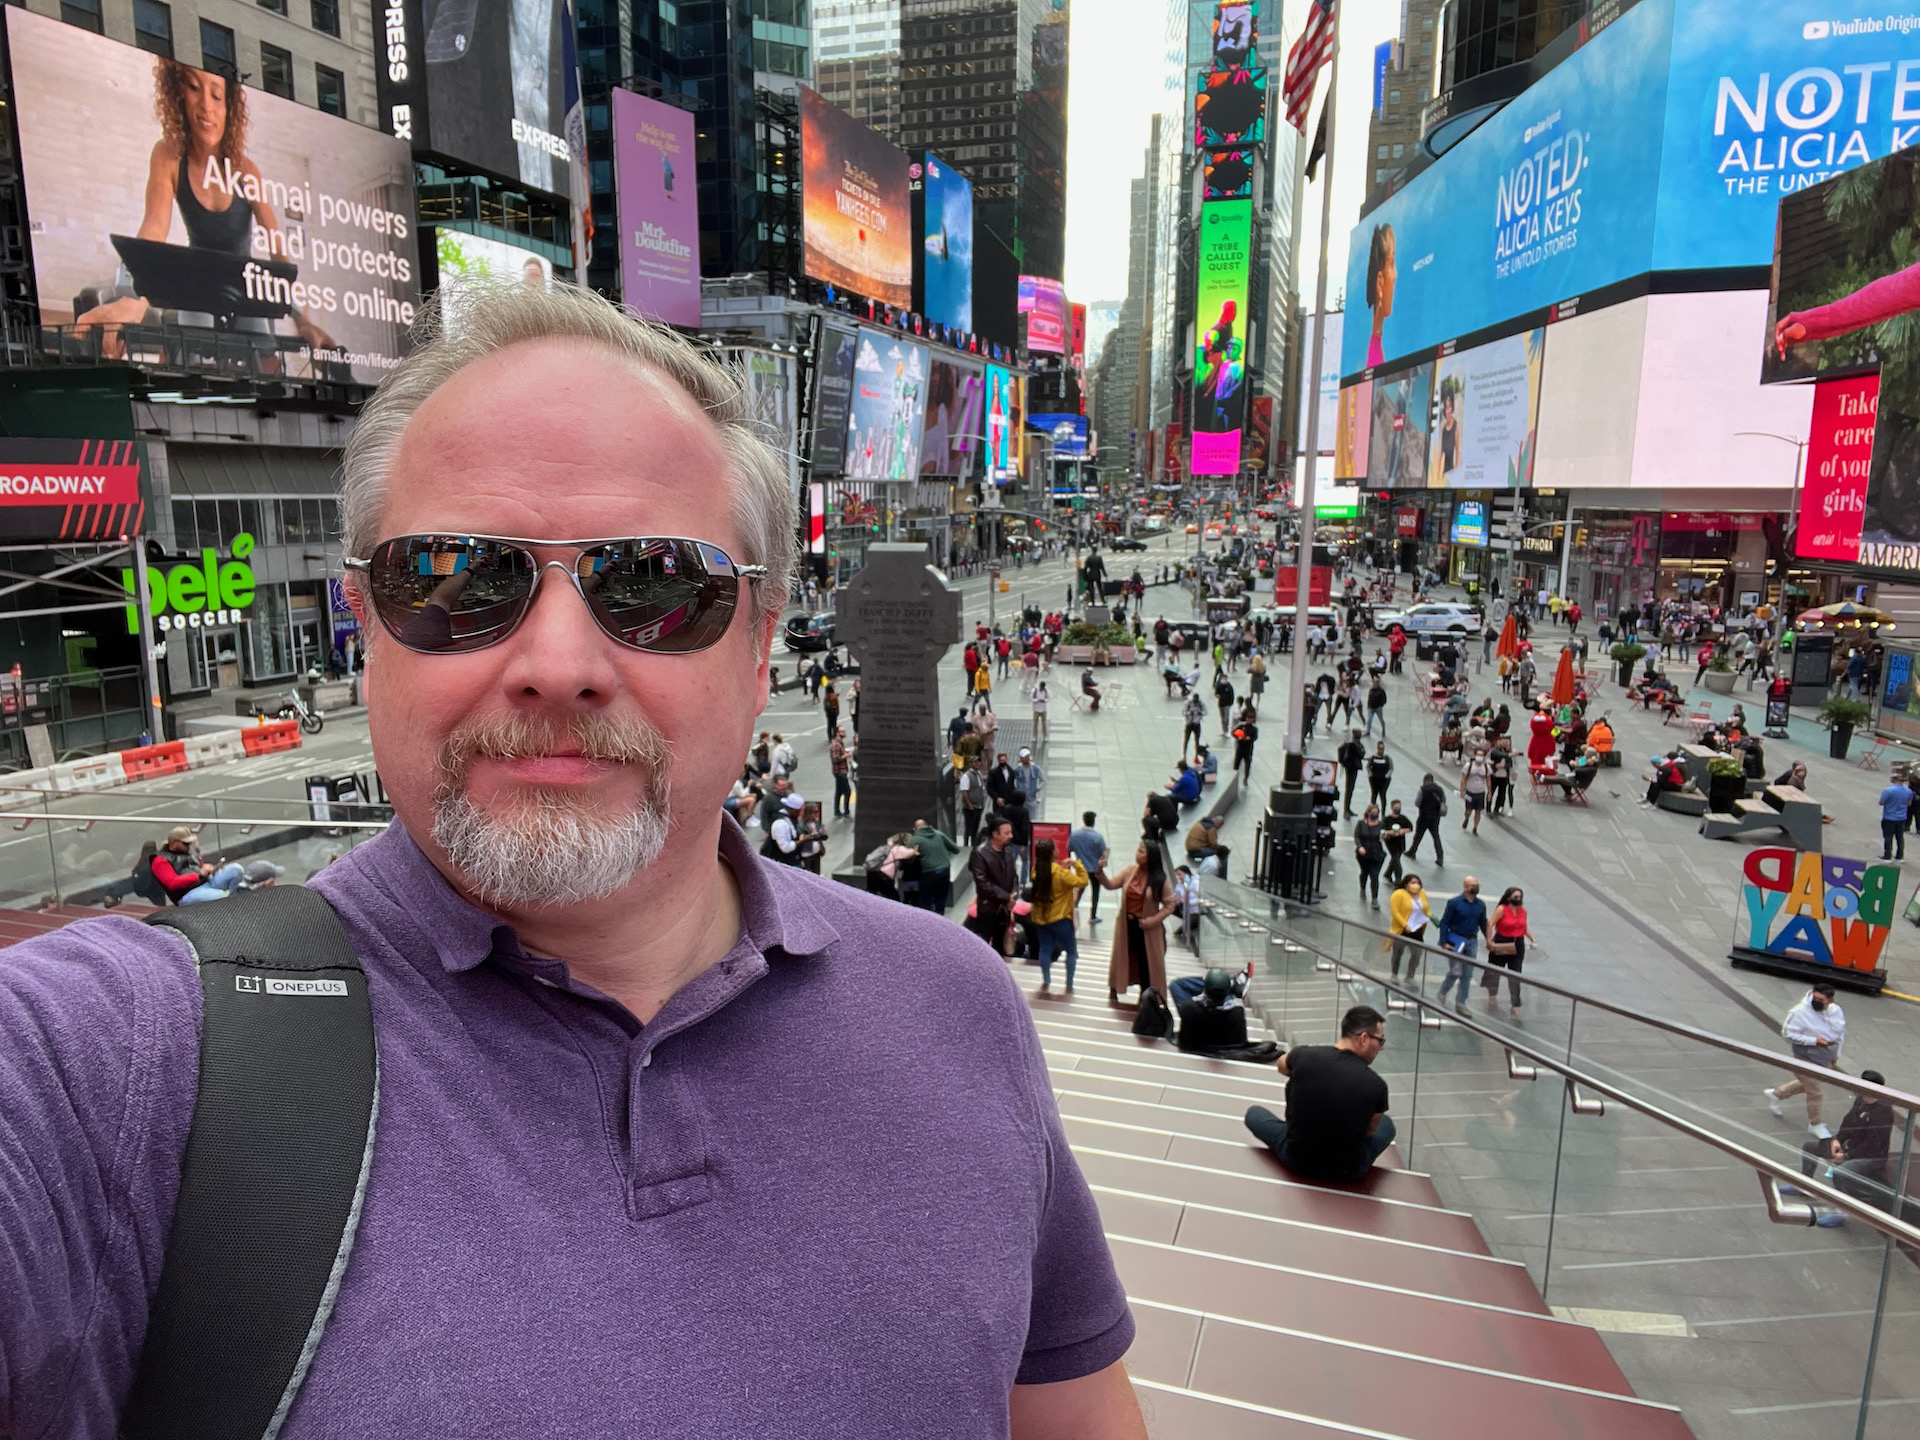 Apple iPhone 13 photo sample Times Square selfie of a man with light colored hair and beard wearing a purple top and black shades